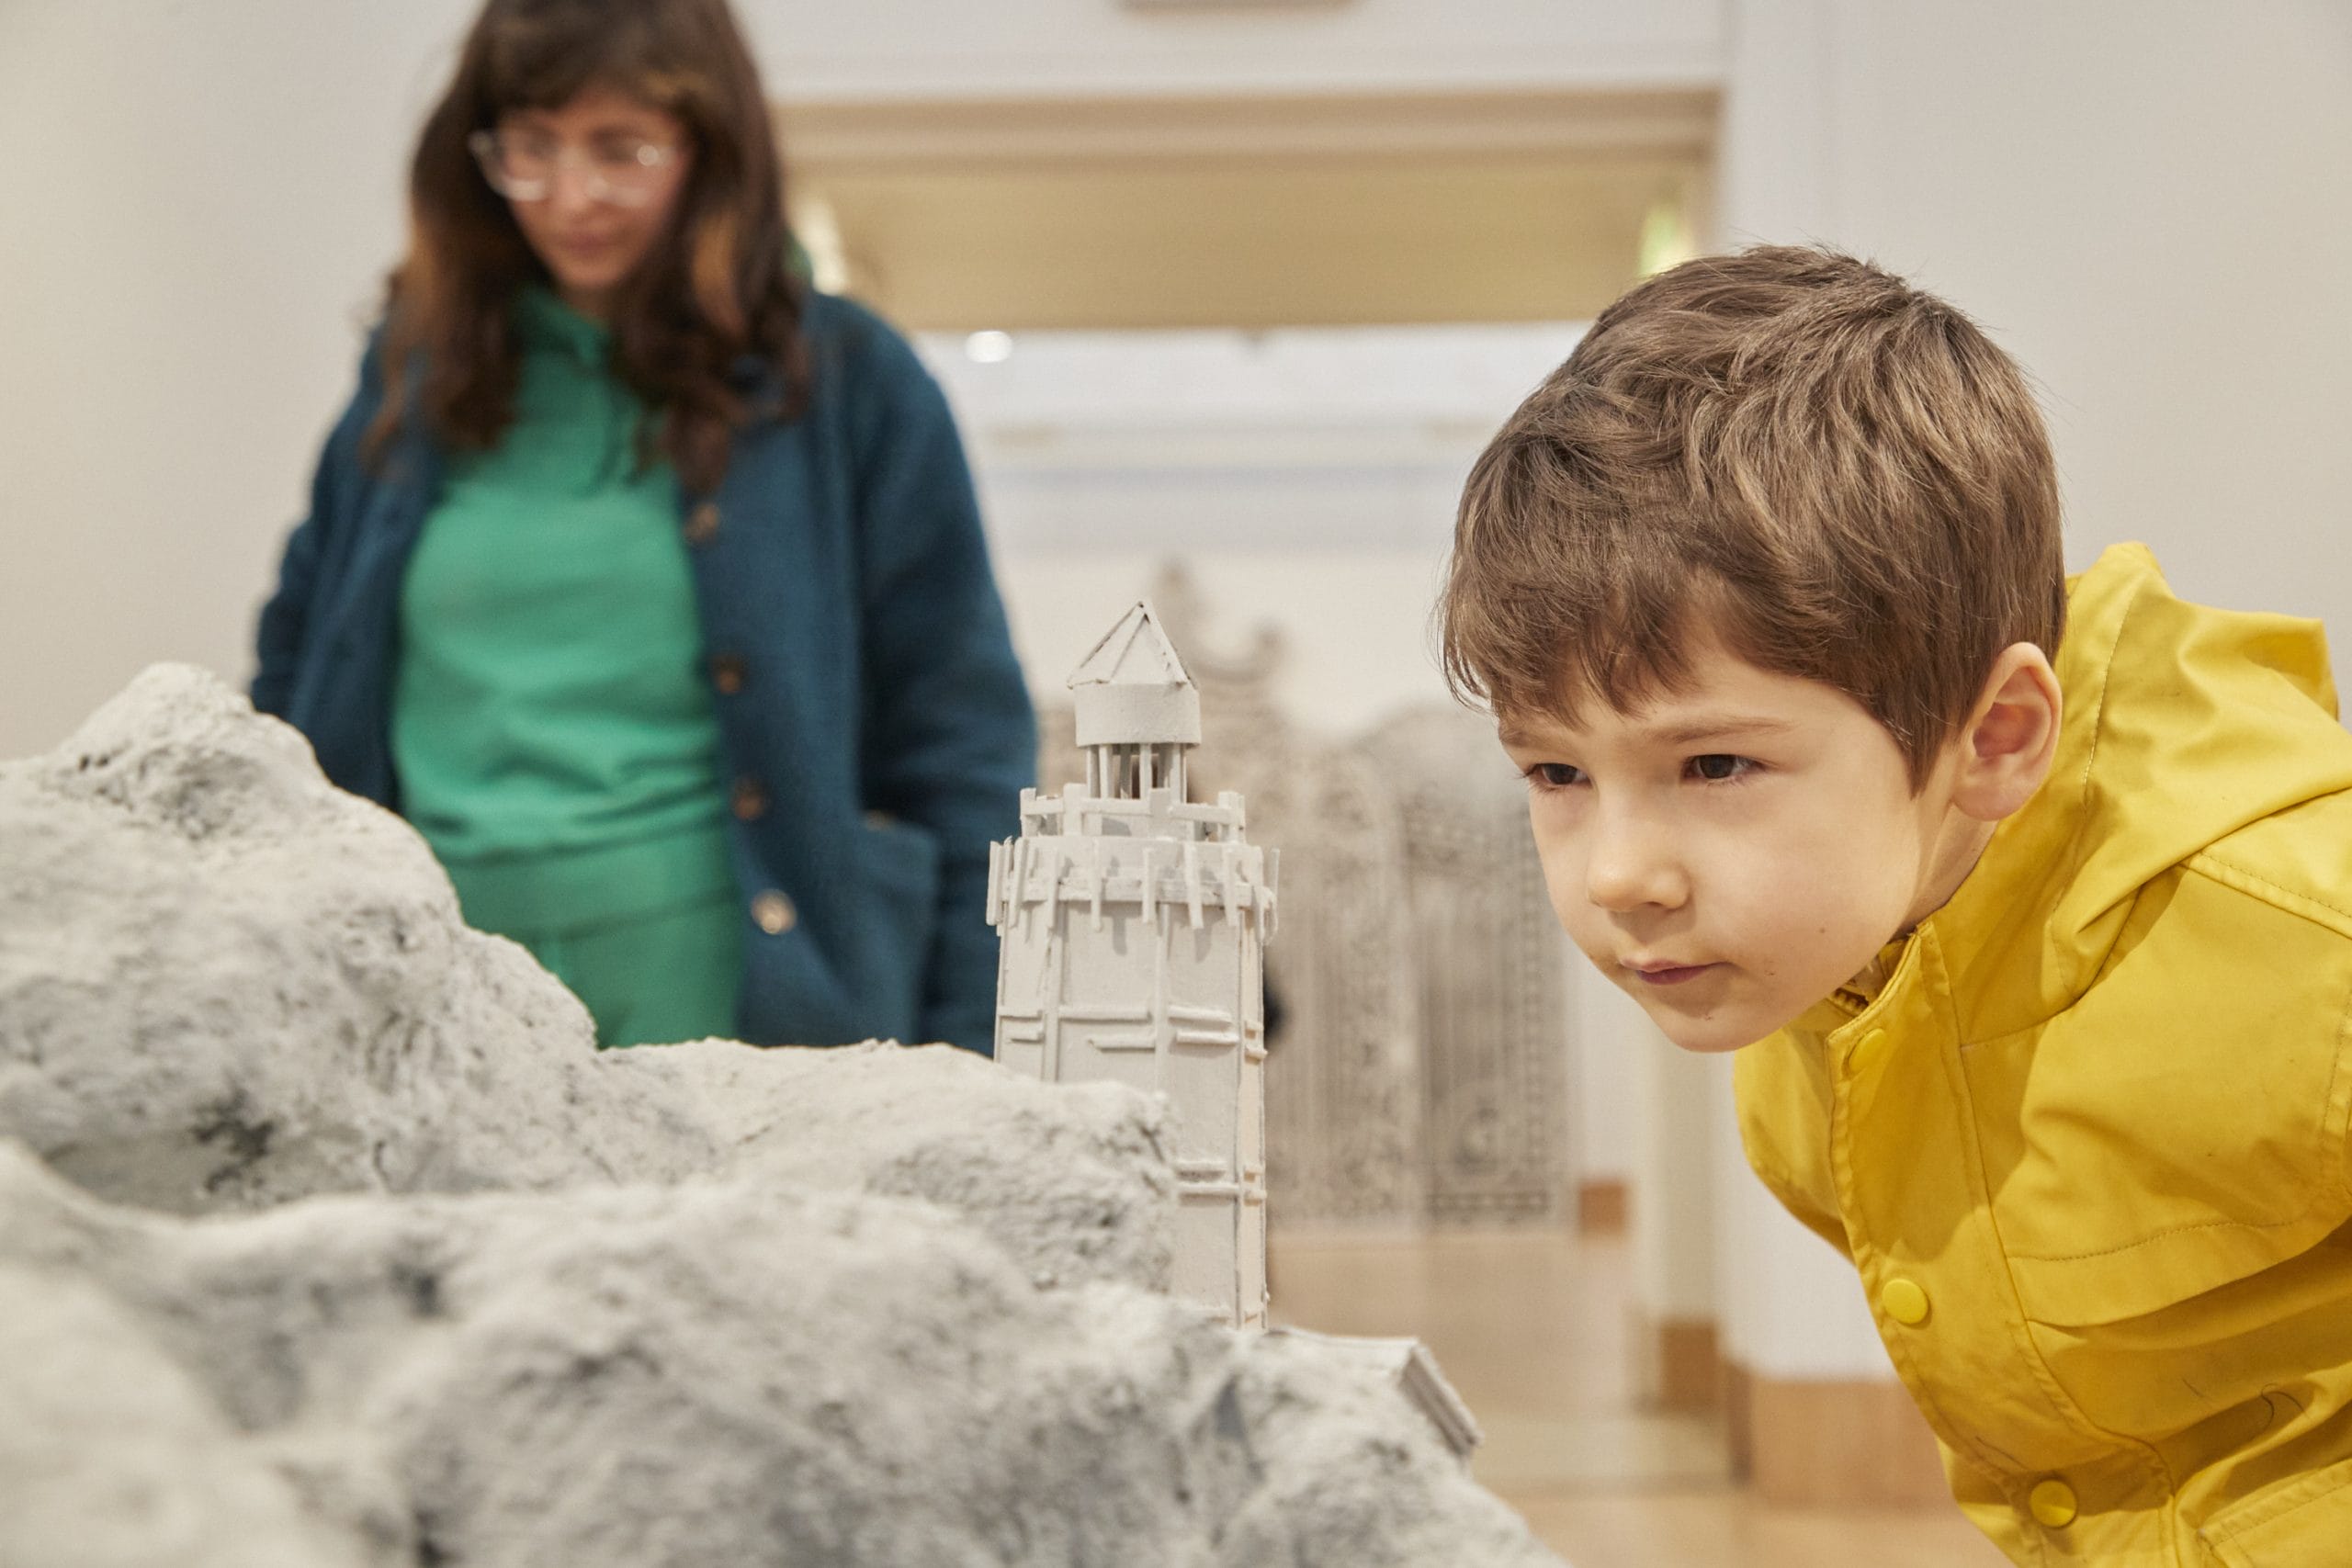 A small boy in a yellow coat admires a rocky landscape sculpture in a gallery, with a lady in a green jumper in the background.